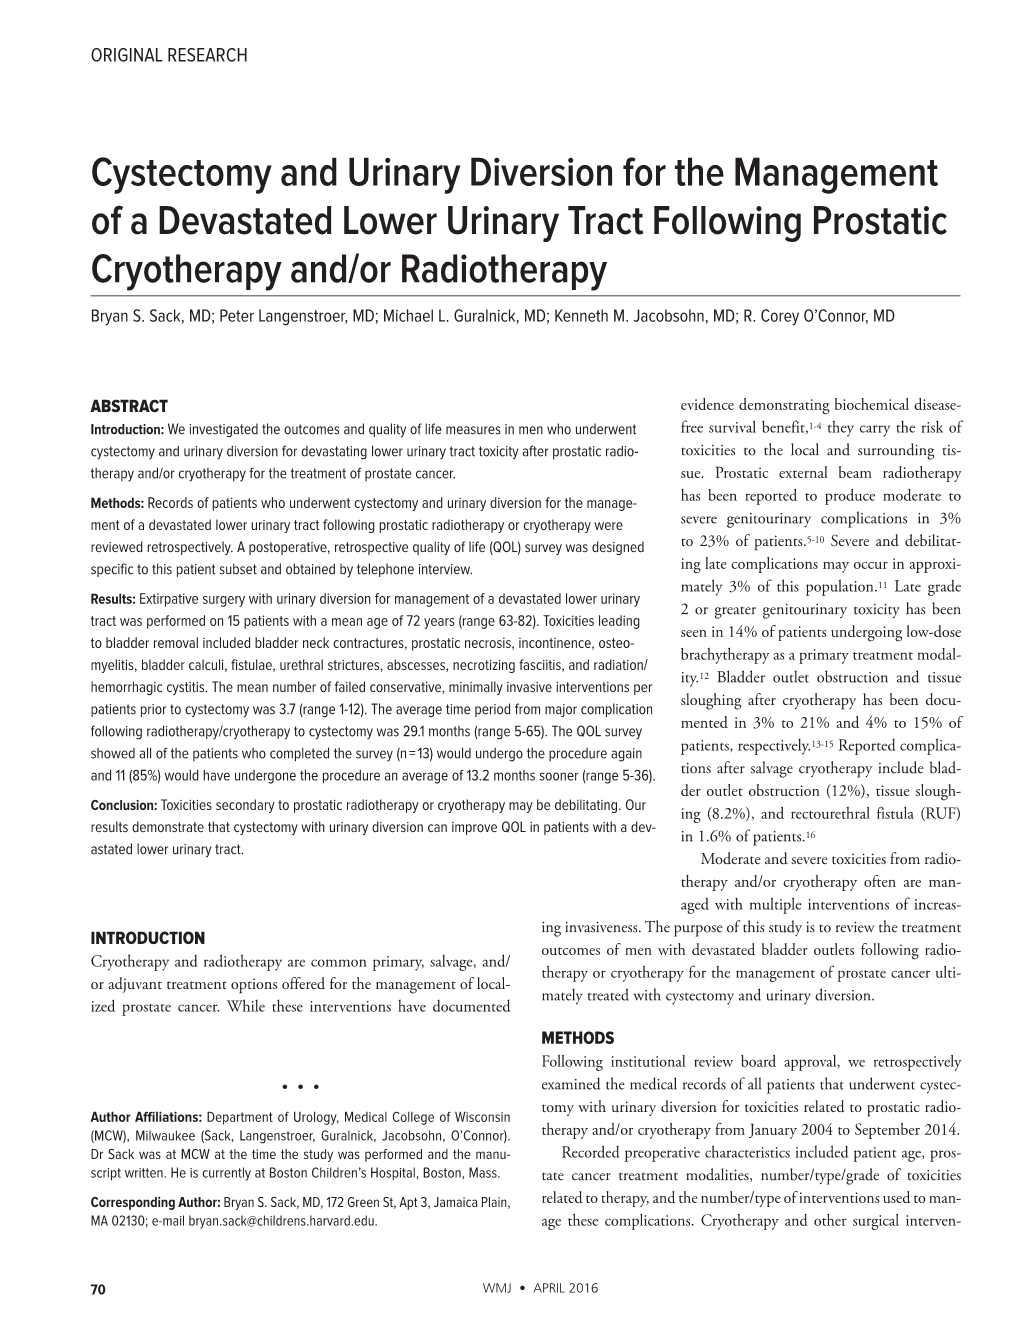 Cystectomy and Urinary Diversion for the Management of a Devastated Lower Urinary Tract Following Prostatic Cryotherapy And/Or Radiotherapy Bryan S